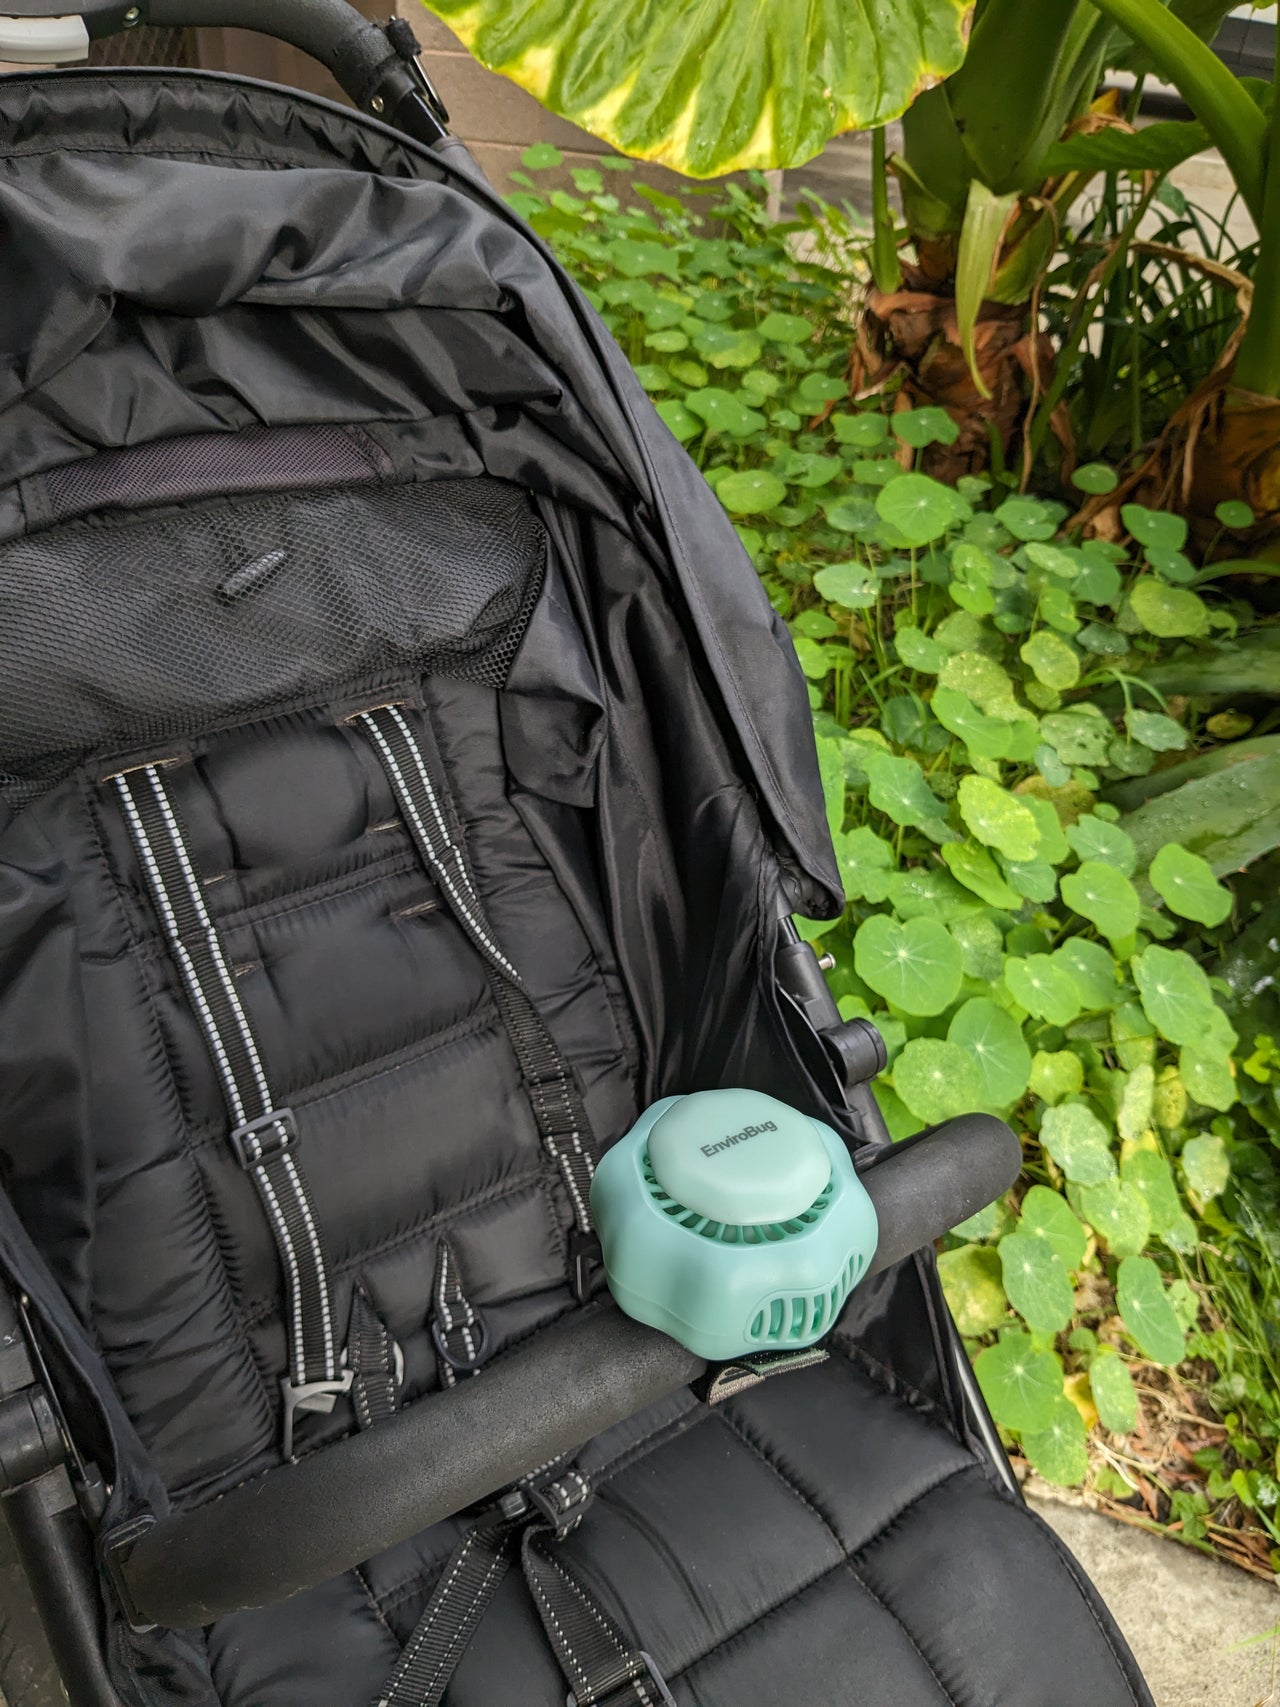 Mozzie Mist Personal Insect Repeller - Envirobug